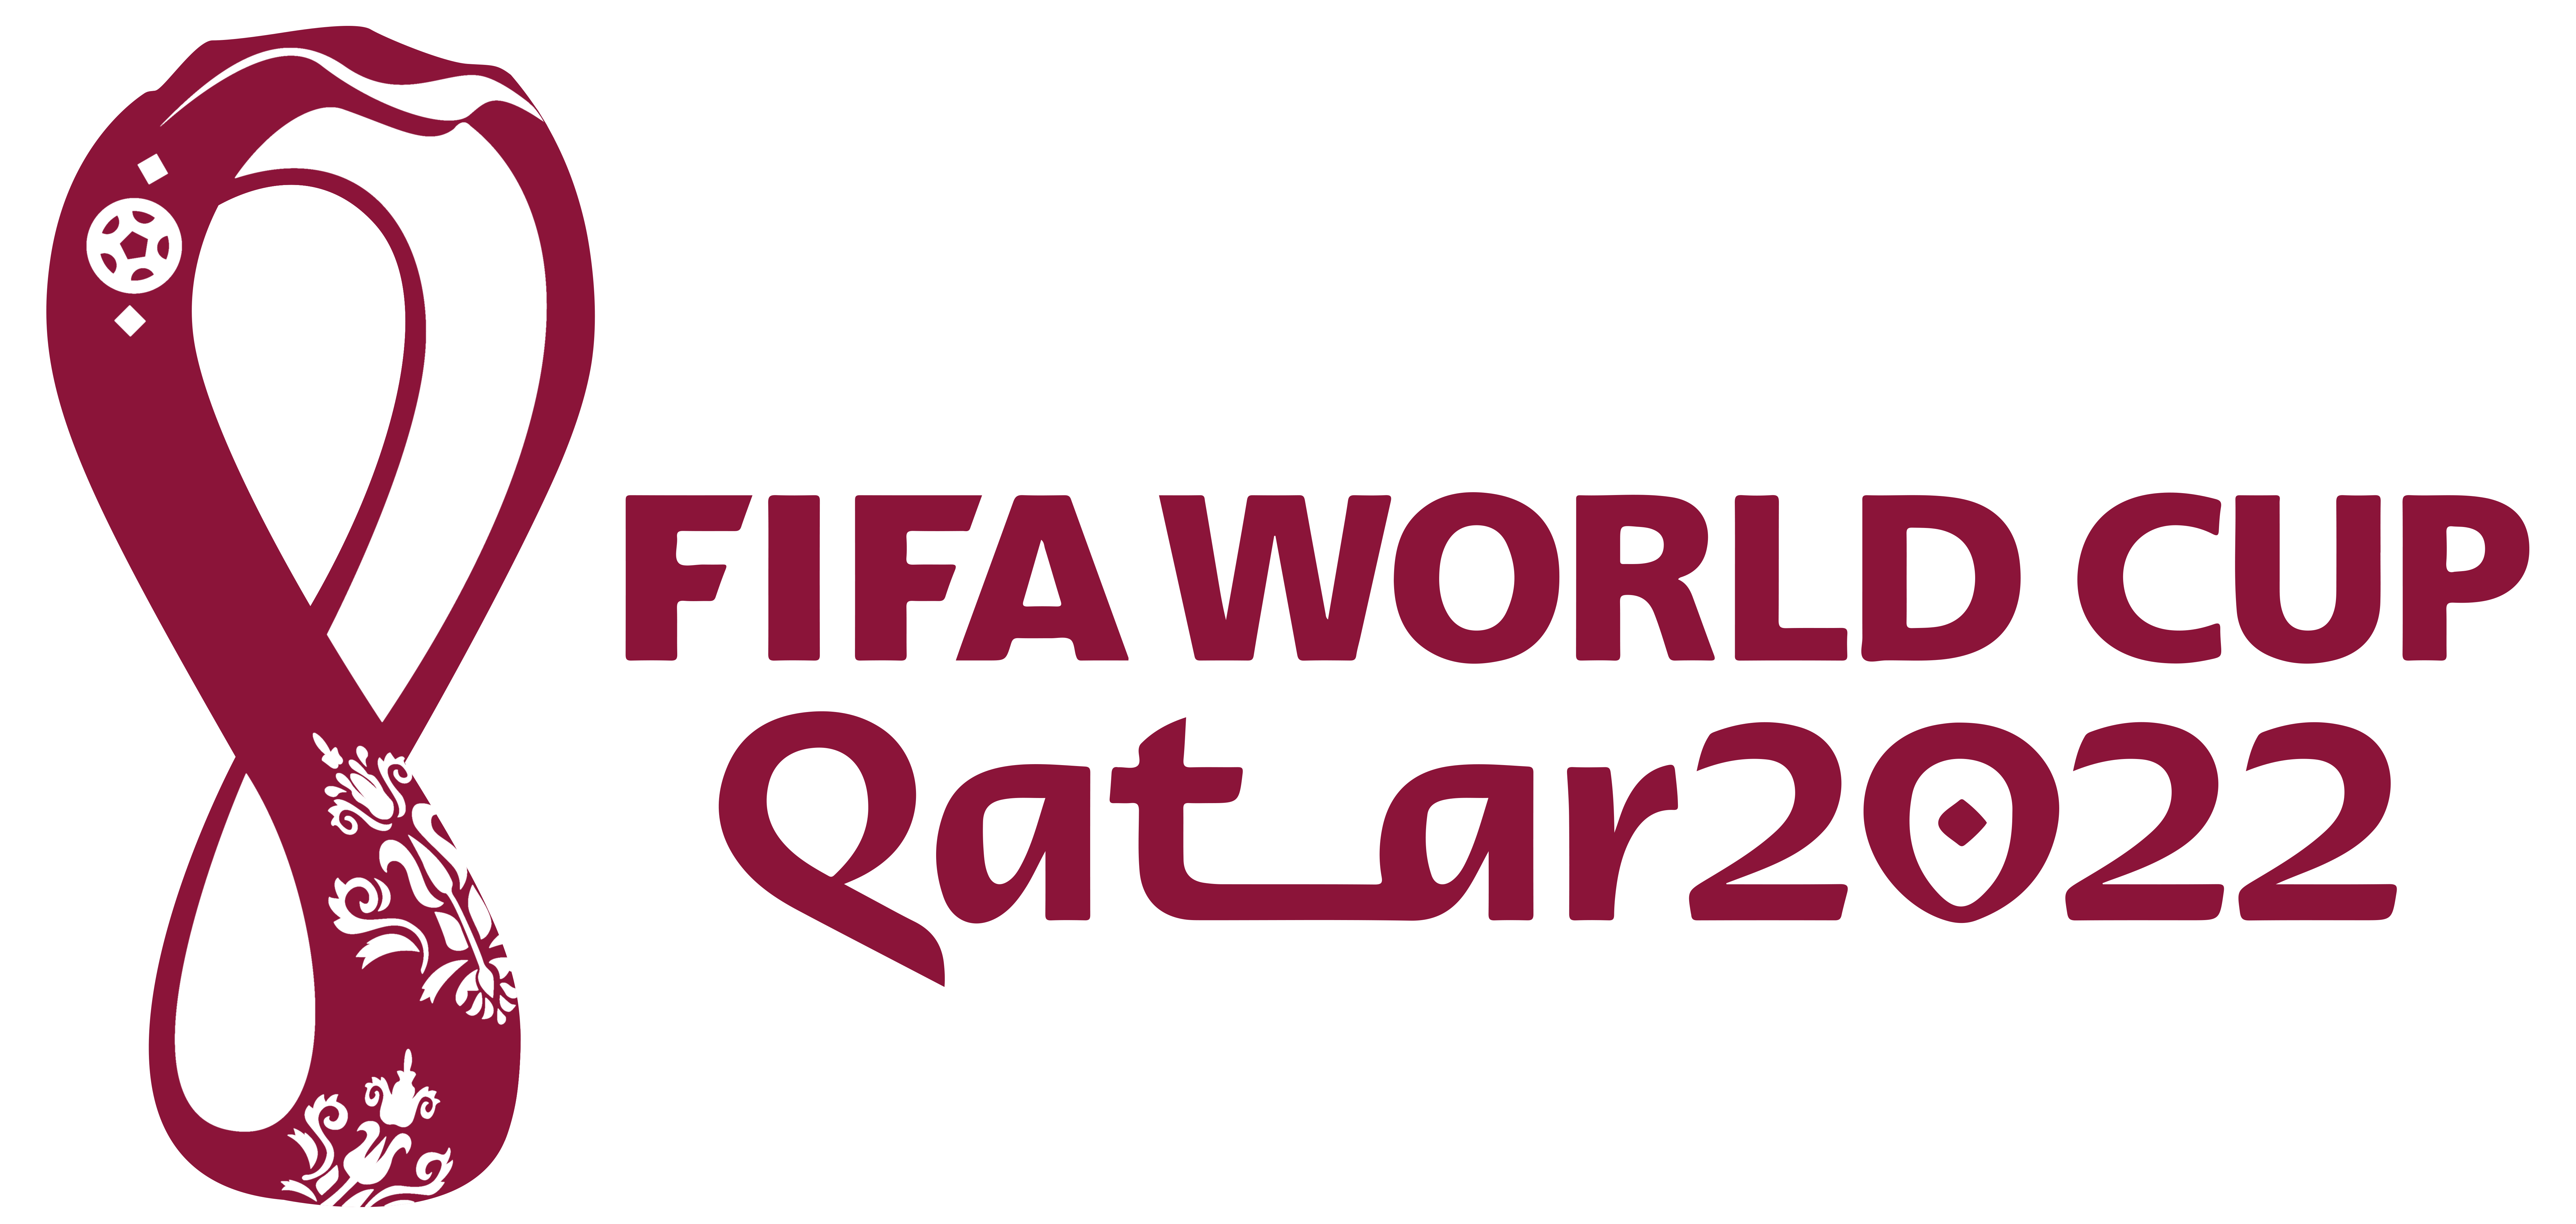 World-Cup-Qatar-2022-FIFA-Red-Logo-PNG-Transparent-Image